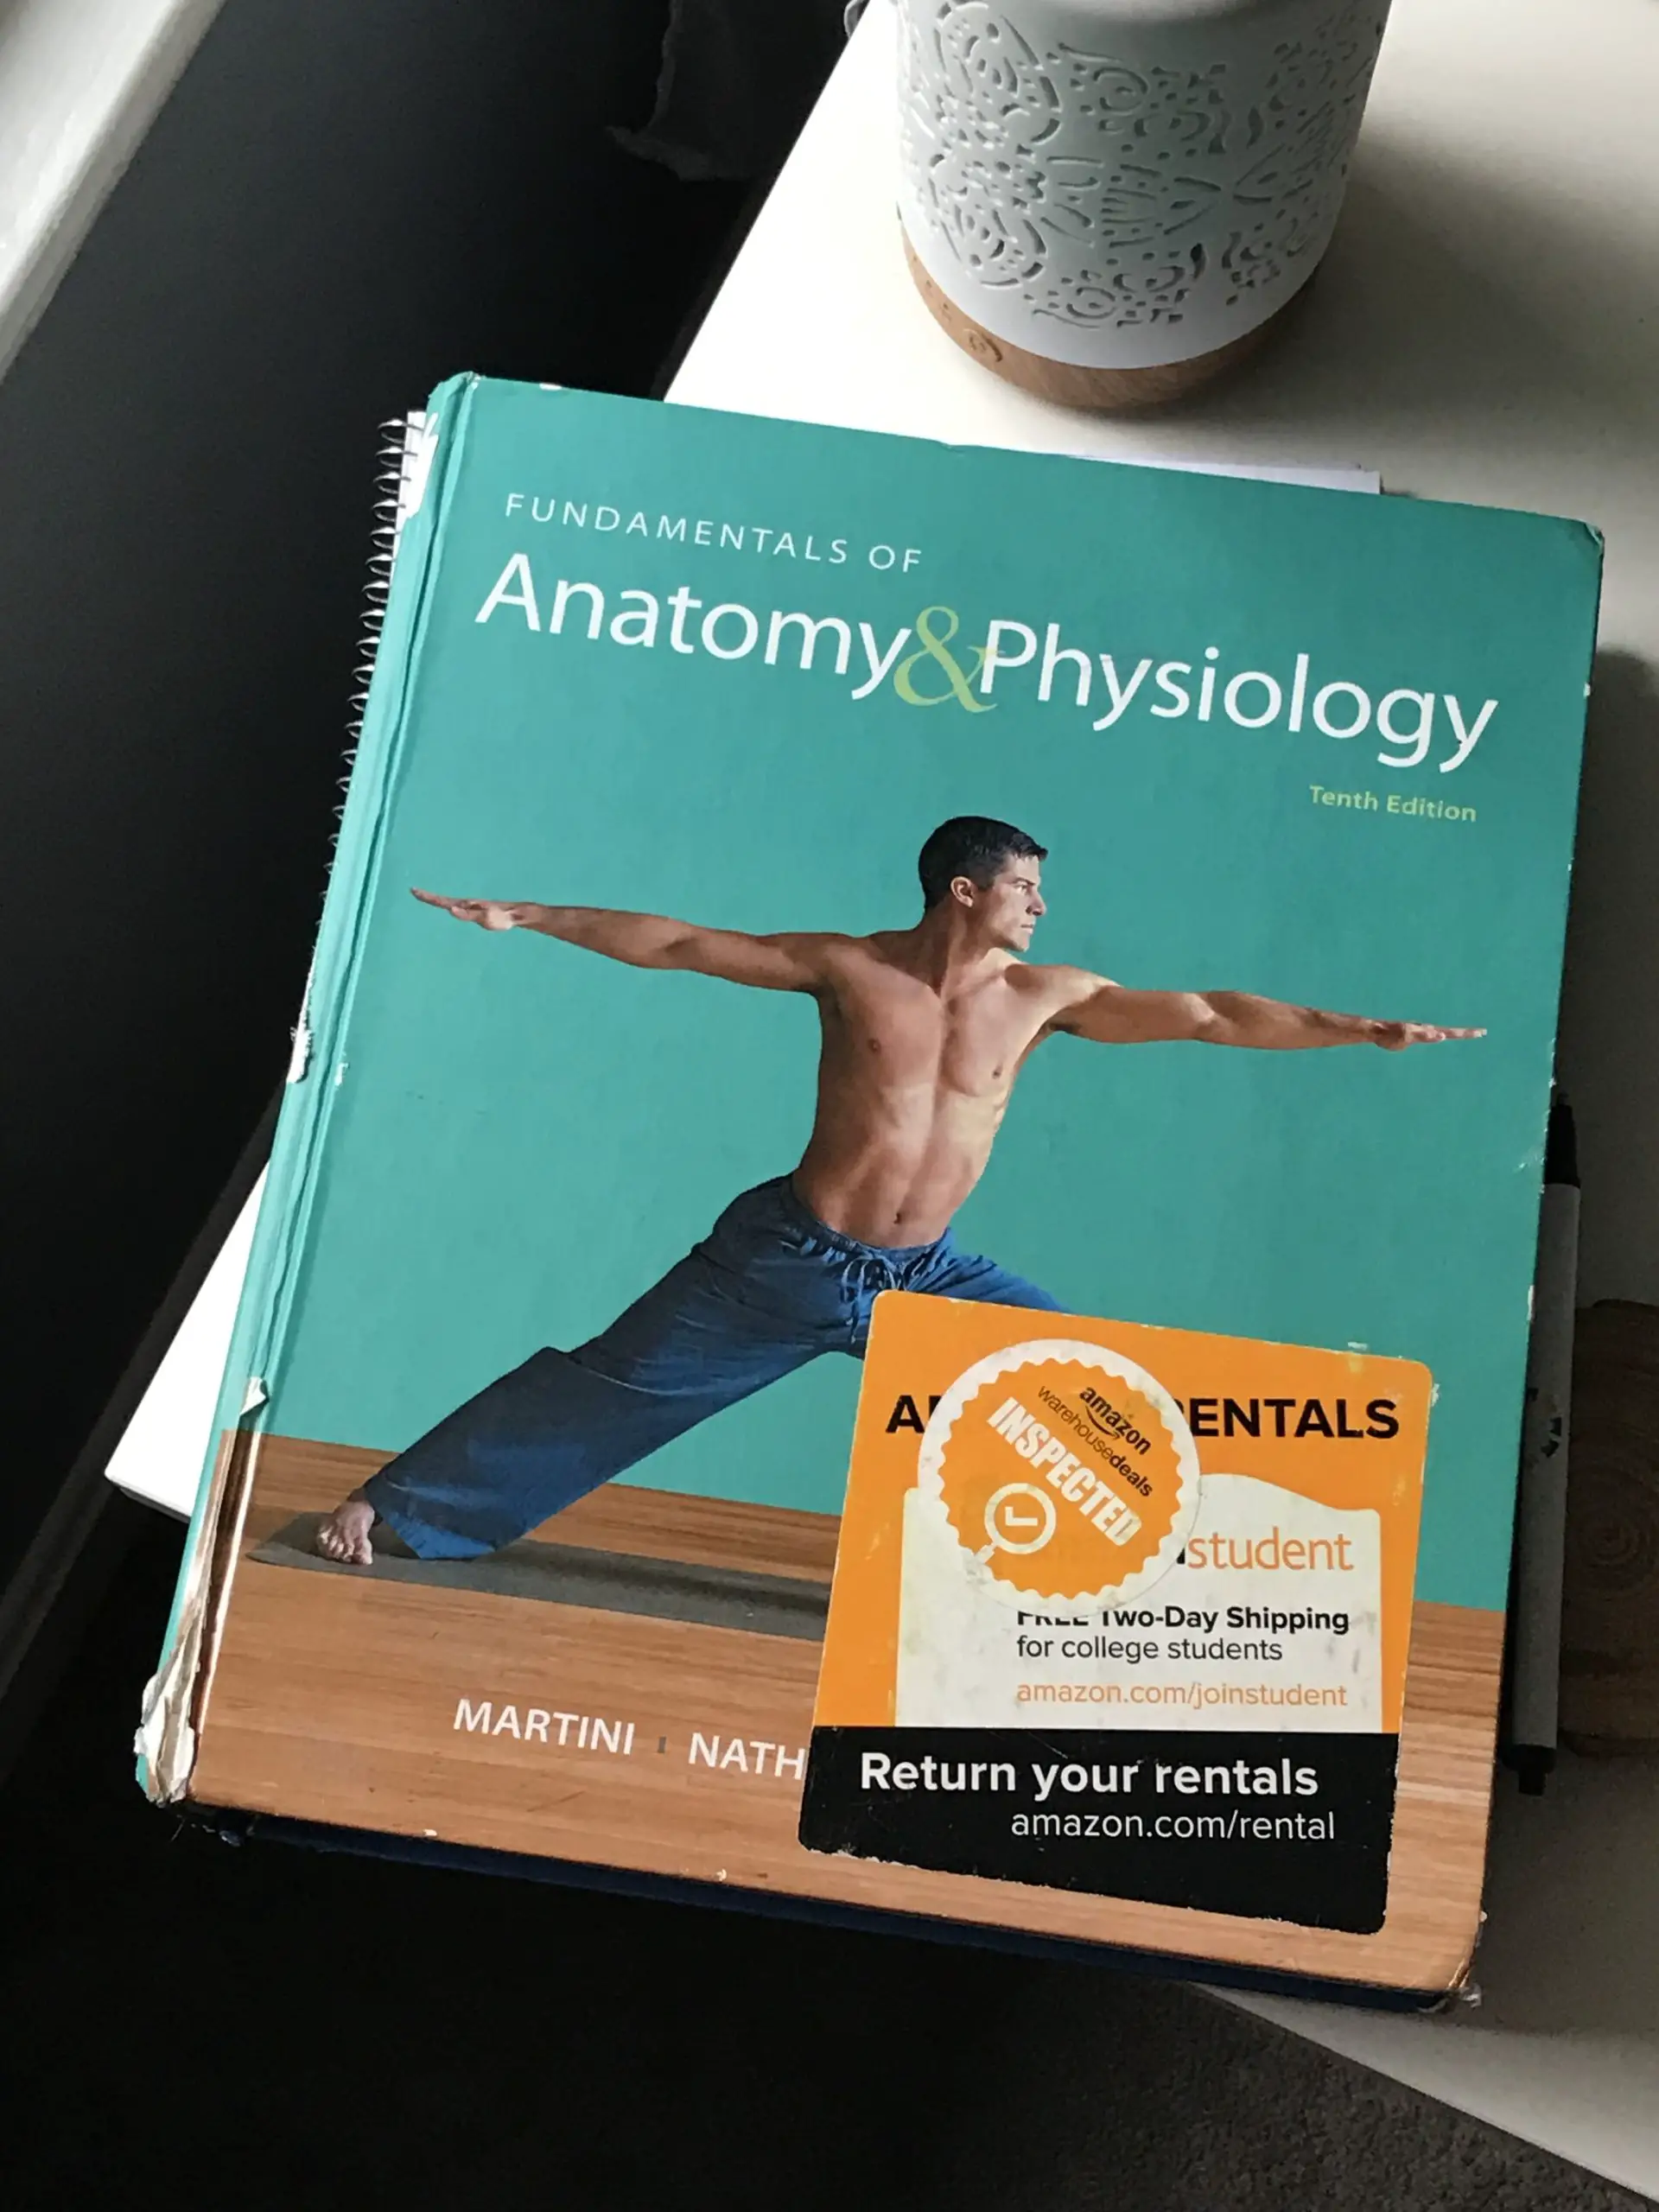 Anatomy and Physiology textbook.